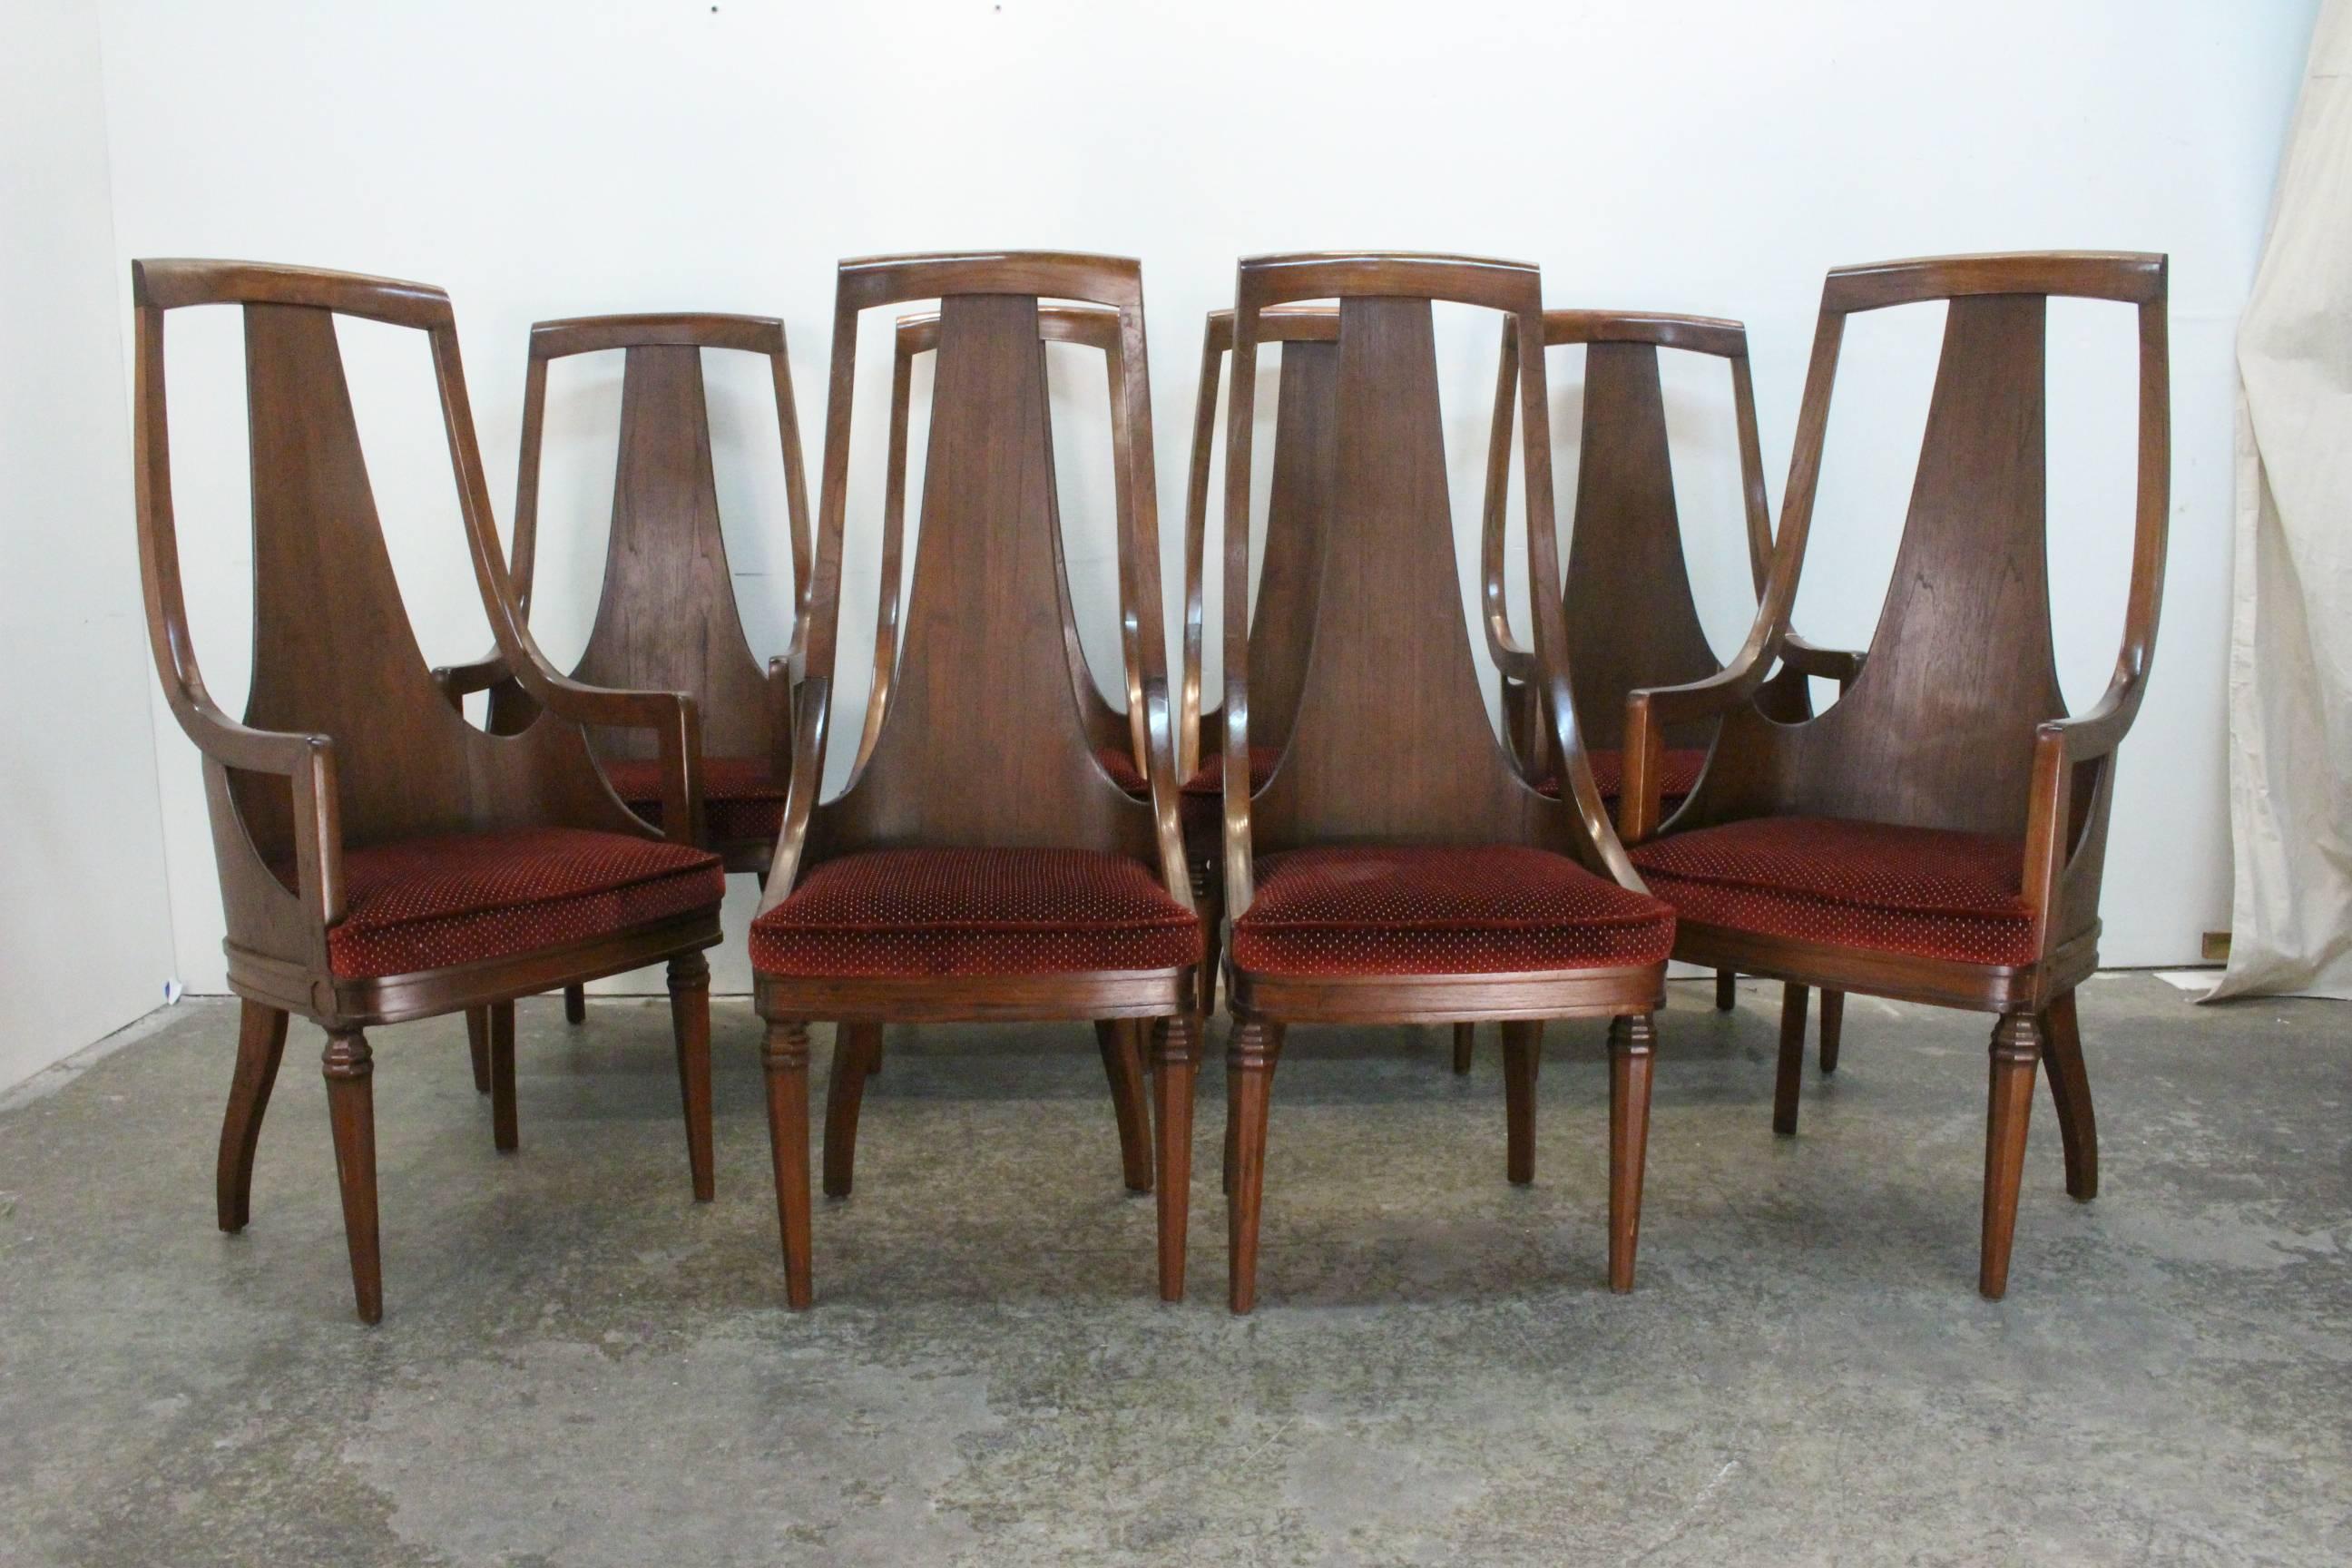 Set of 8 High Back Mid-Century Walnut Dining Chairs. There are a set of 4 armchairs and 4 side chairs. 

dimensions: 19